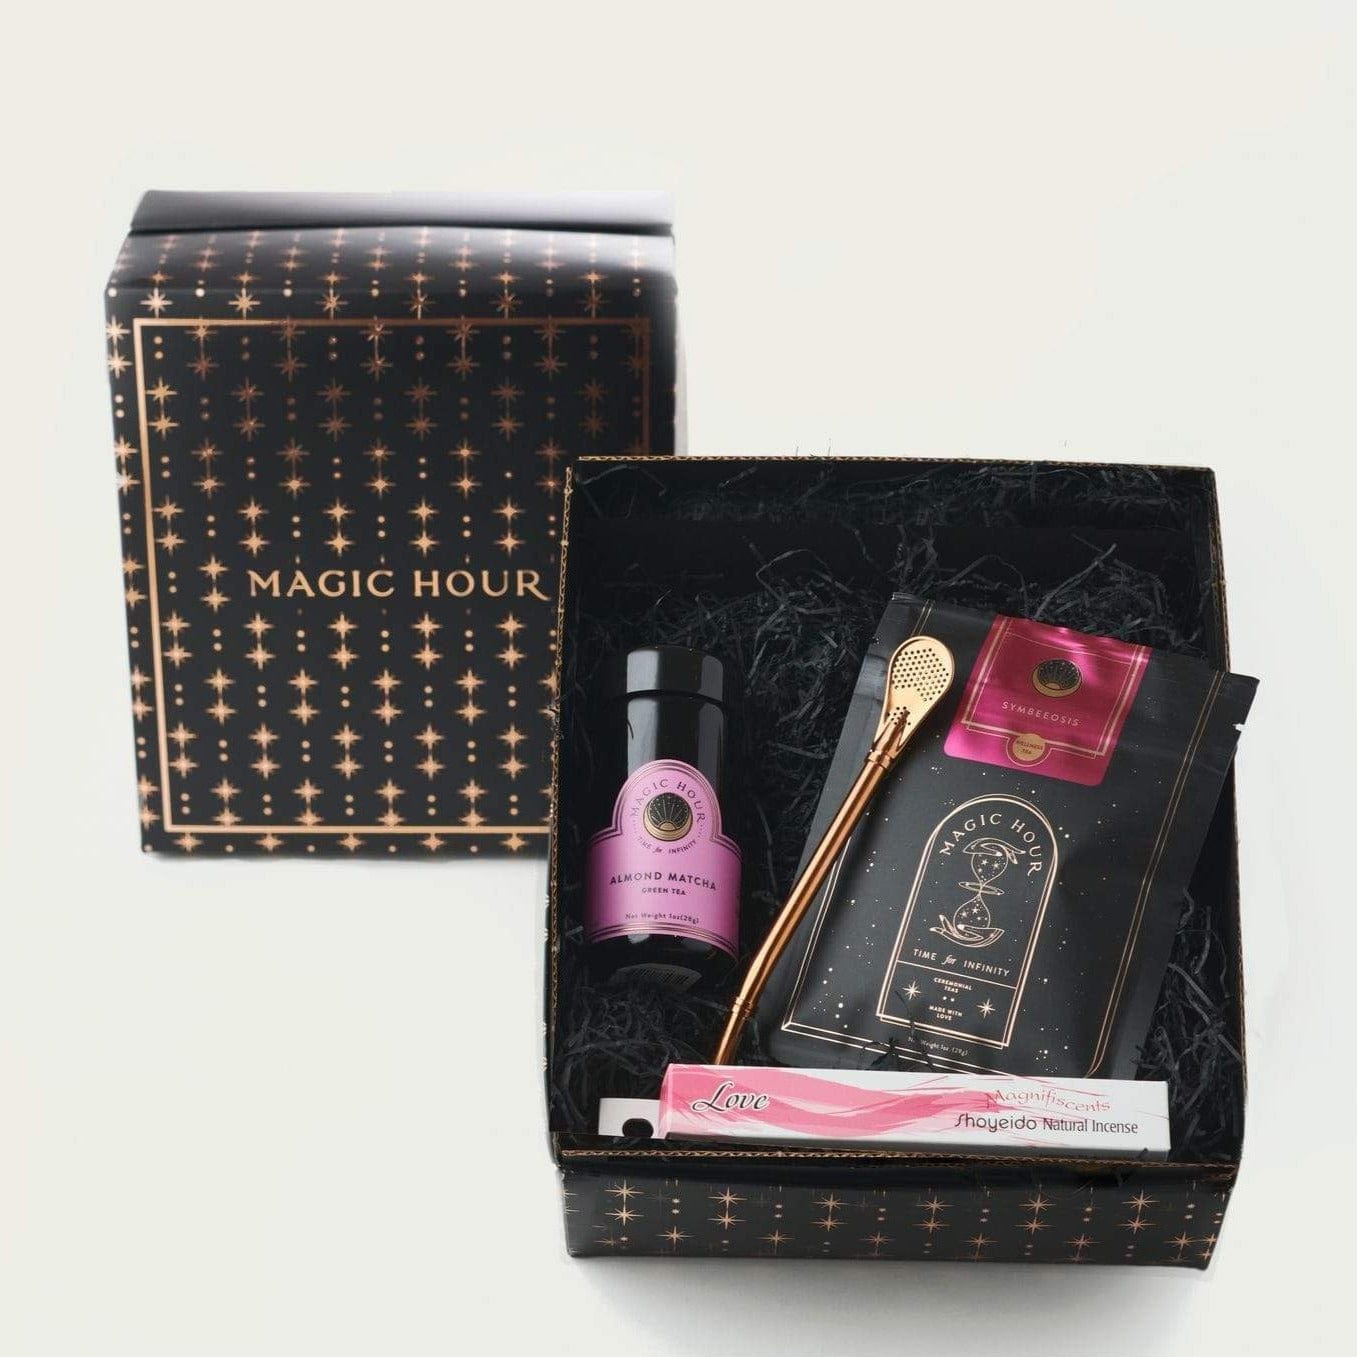 A gift box with "Magic Hour" written on it, containing various items including a small jar with a pink label, a gold spoon, a small glass bottle, a packet of Sip Wellness: Ritual Kit for Immunity & Joy Tea, and a roll of Magic Hour brand incense. The box interior has black shredded paper for padding.